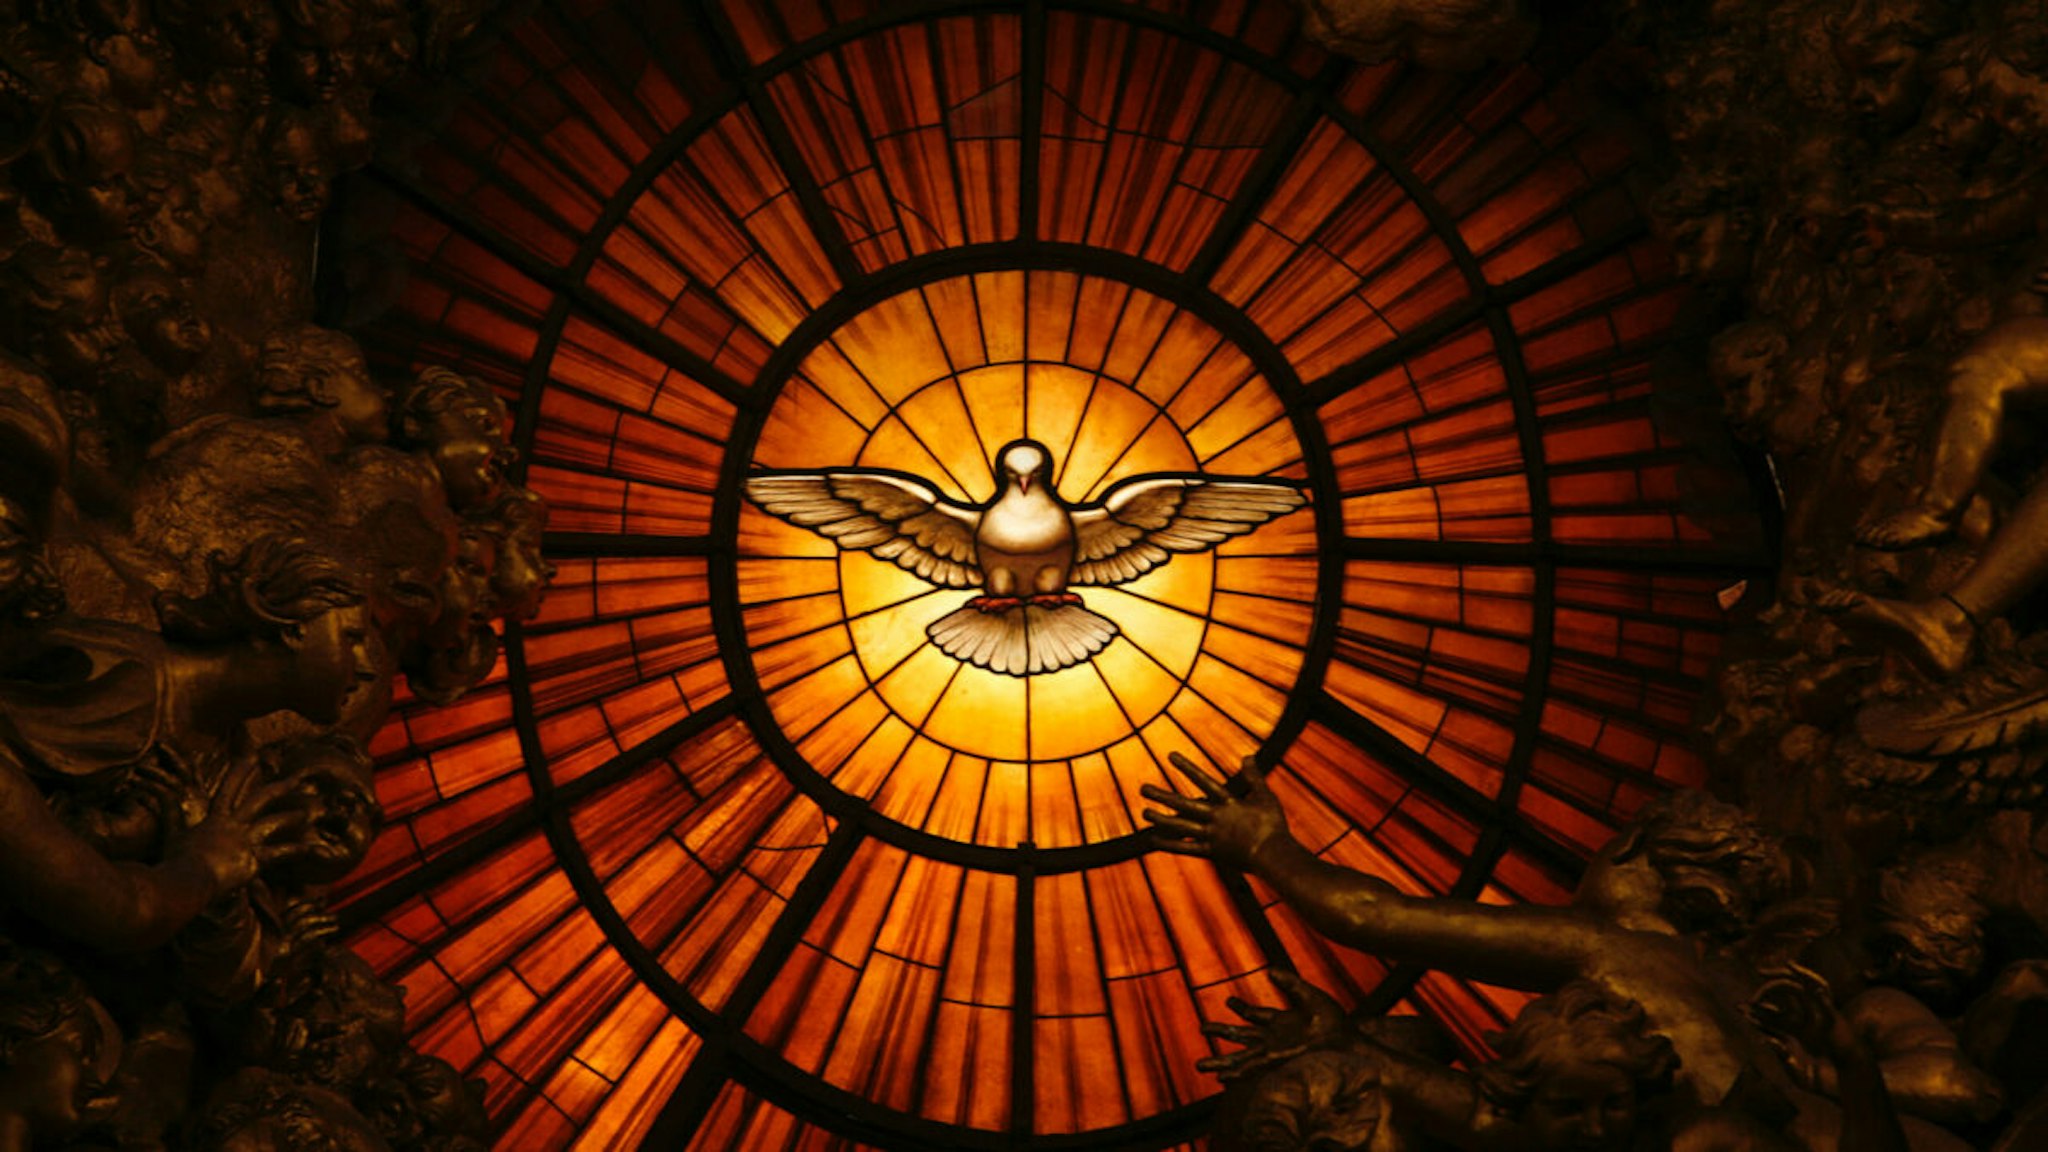 A detail showing the Holy Spirit from Cathedra Petri by Gian Lorenzo Bernini in St. Peter's Basilica.